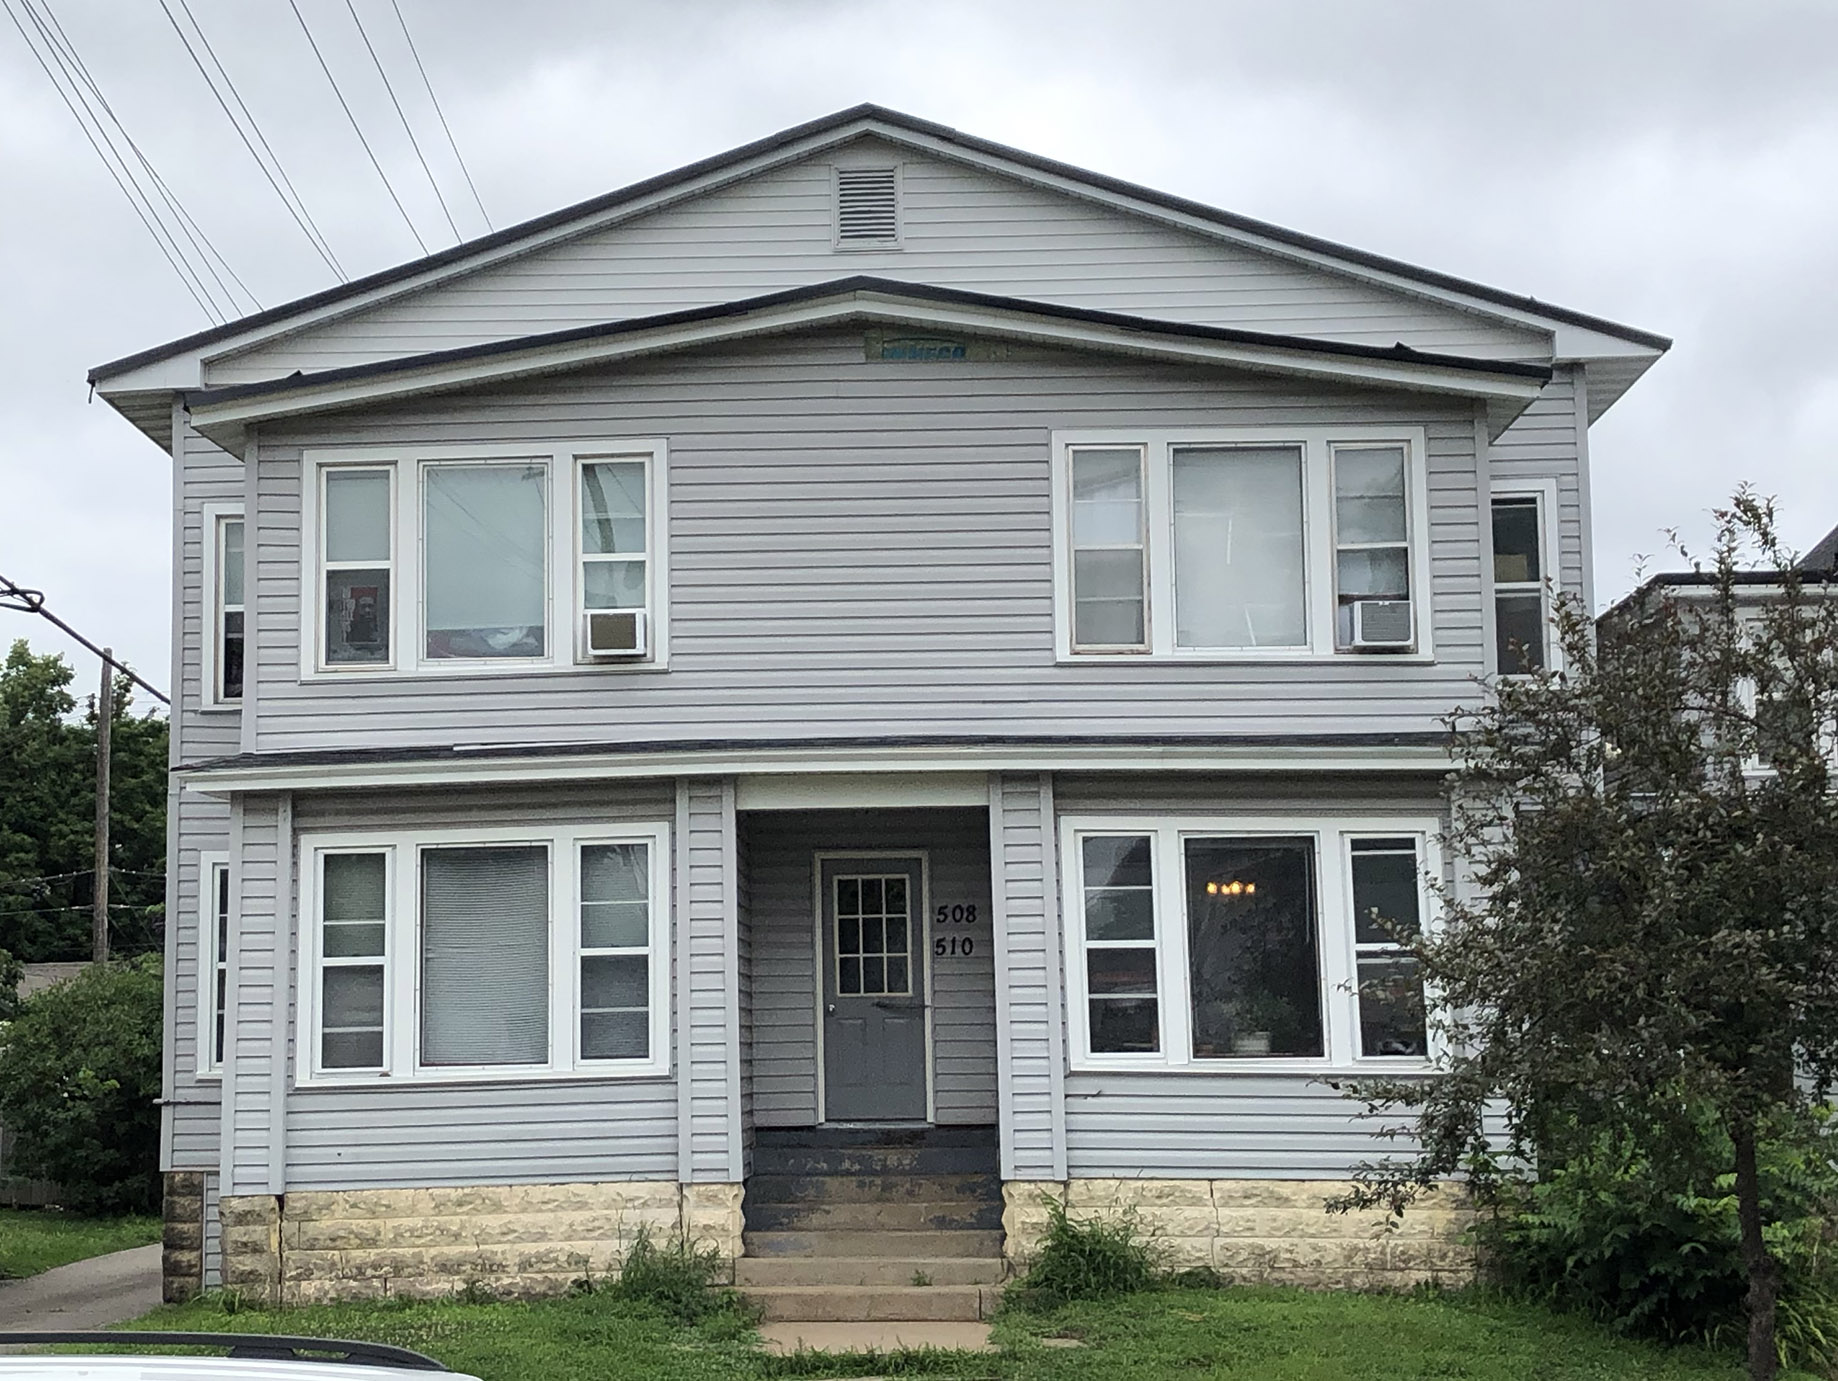 508 West Grand Ave, Eau Claire, Wisconsin 54703, 2 Bedrooms Bedrooms, ,1 BathroomBathrooms,Multi-Family,Apartment,508 West Grand Ave,1127